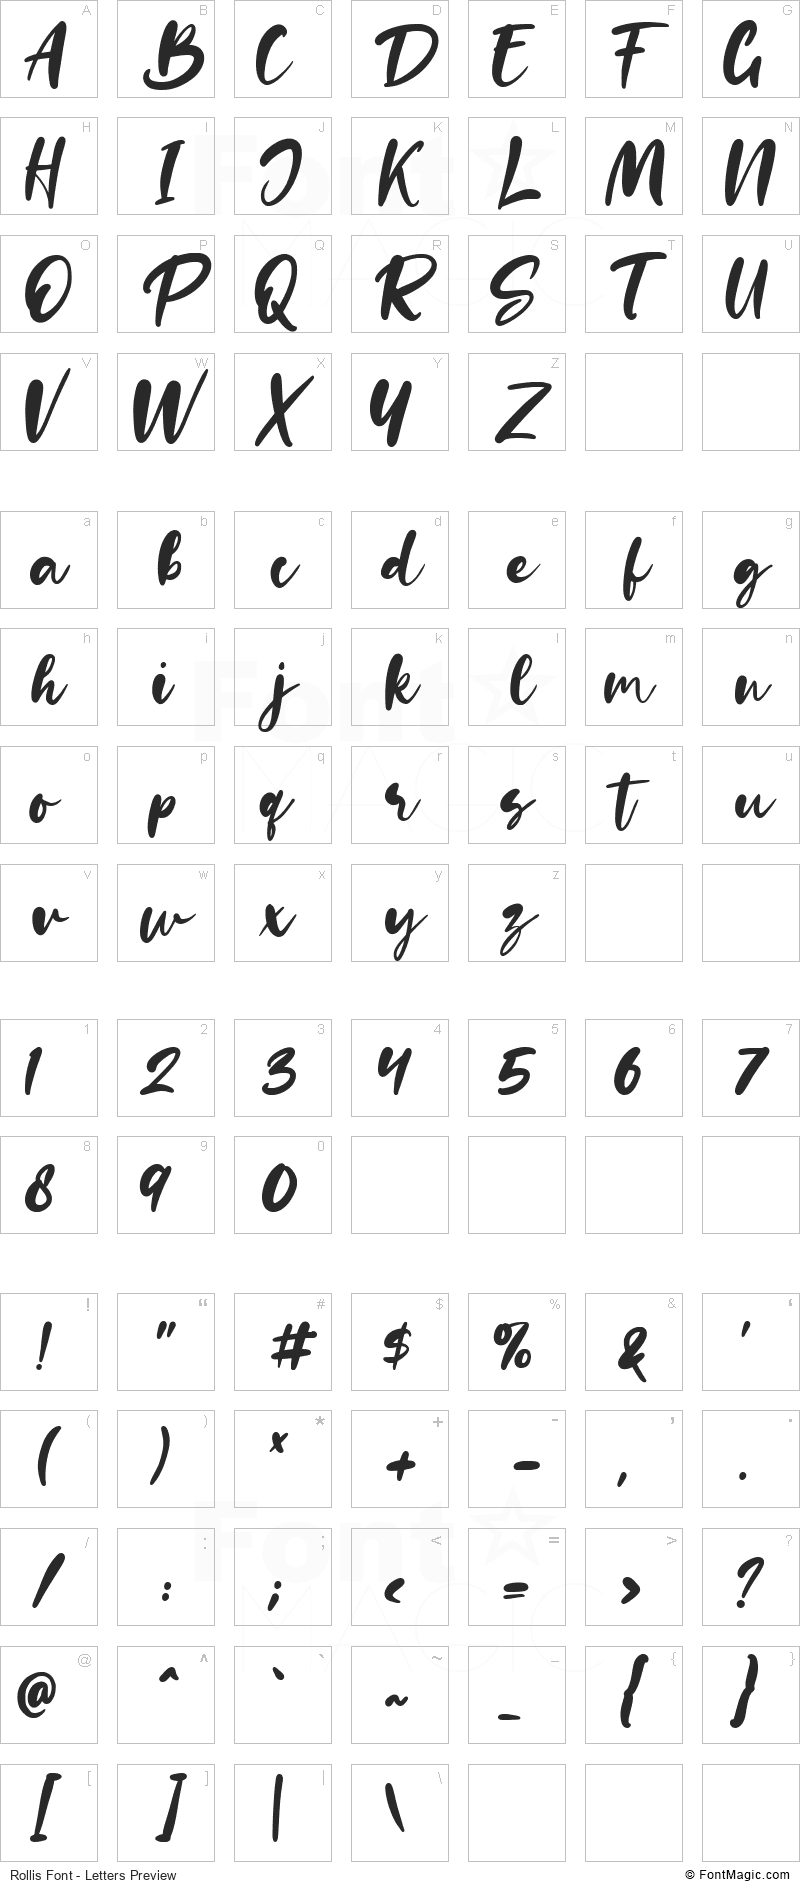 Rollis Font - All Latters Preview Chart